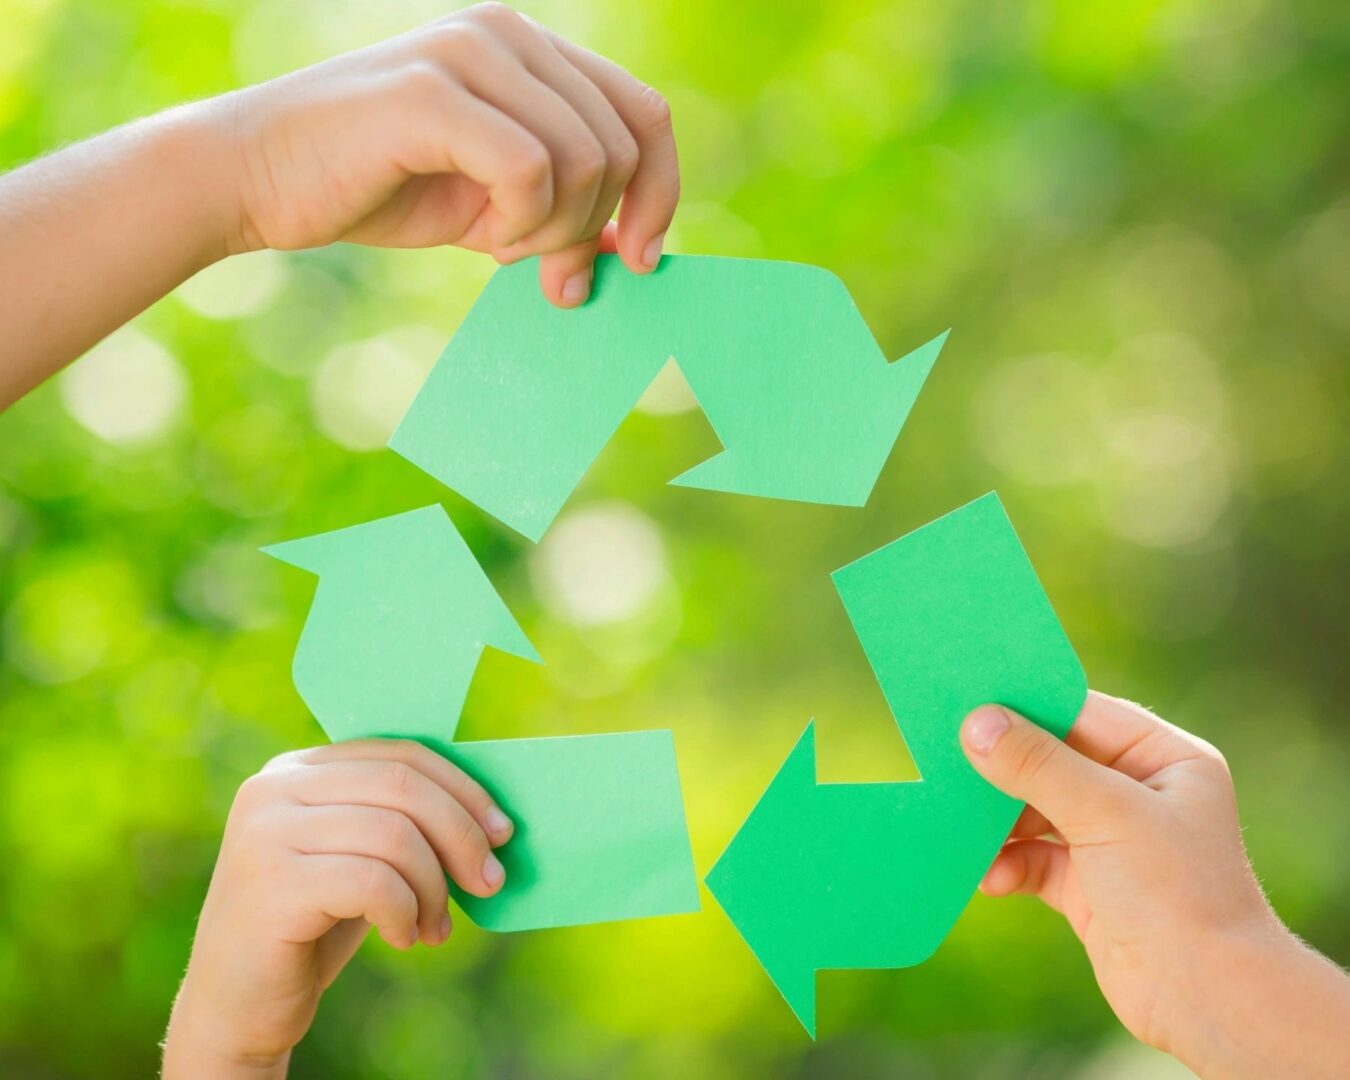 Four hands holding up green paper to recycle symbol.